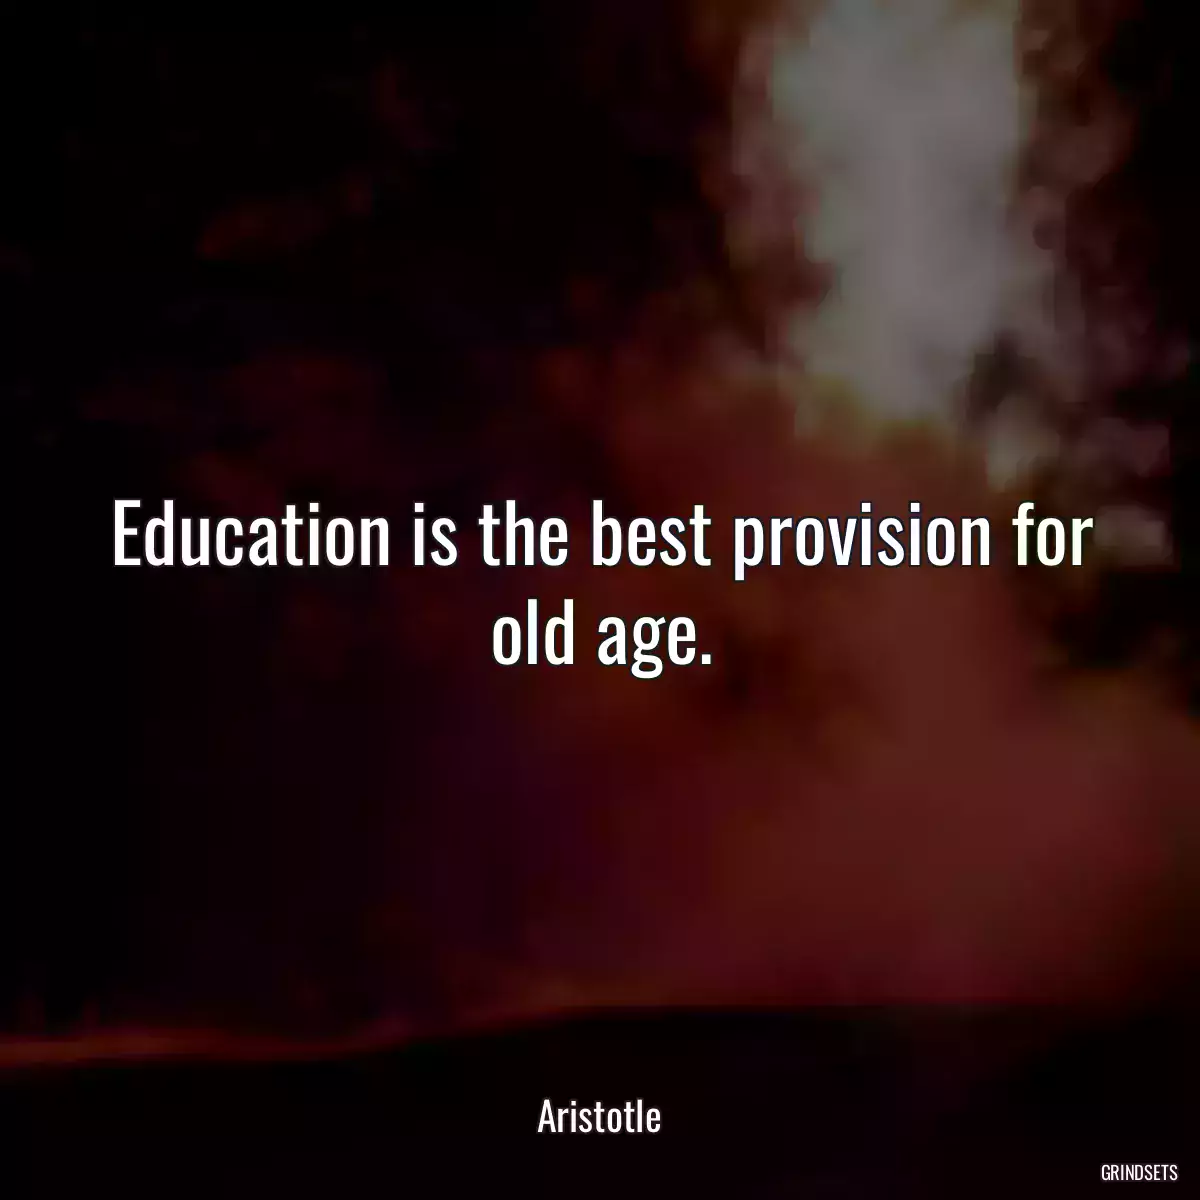 Education is the best provision for old age.